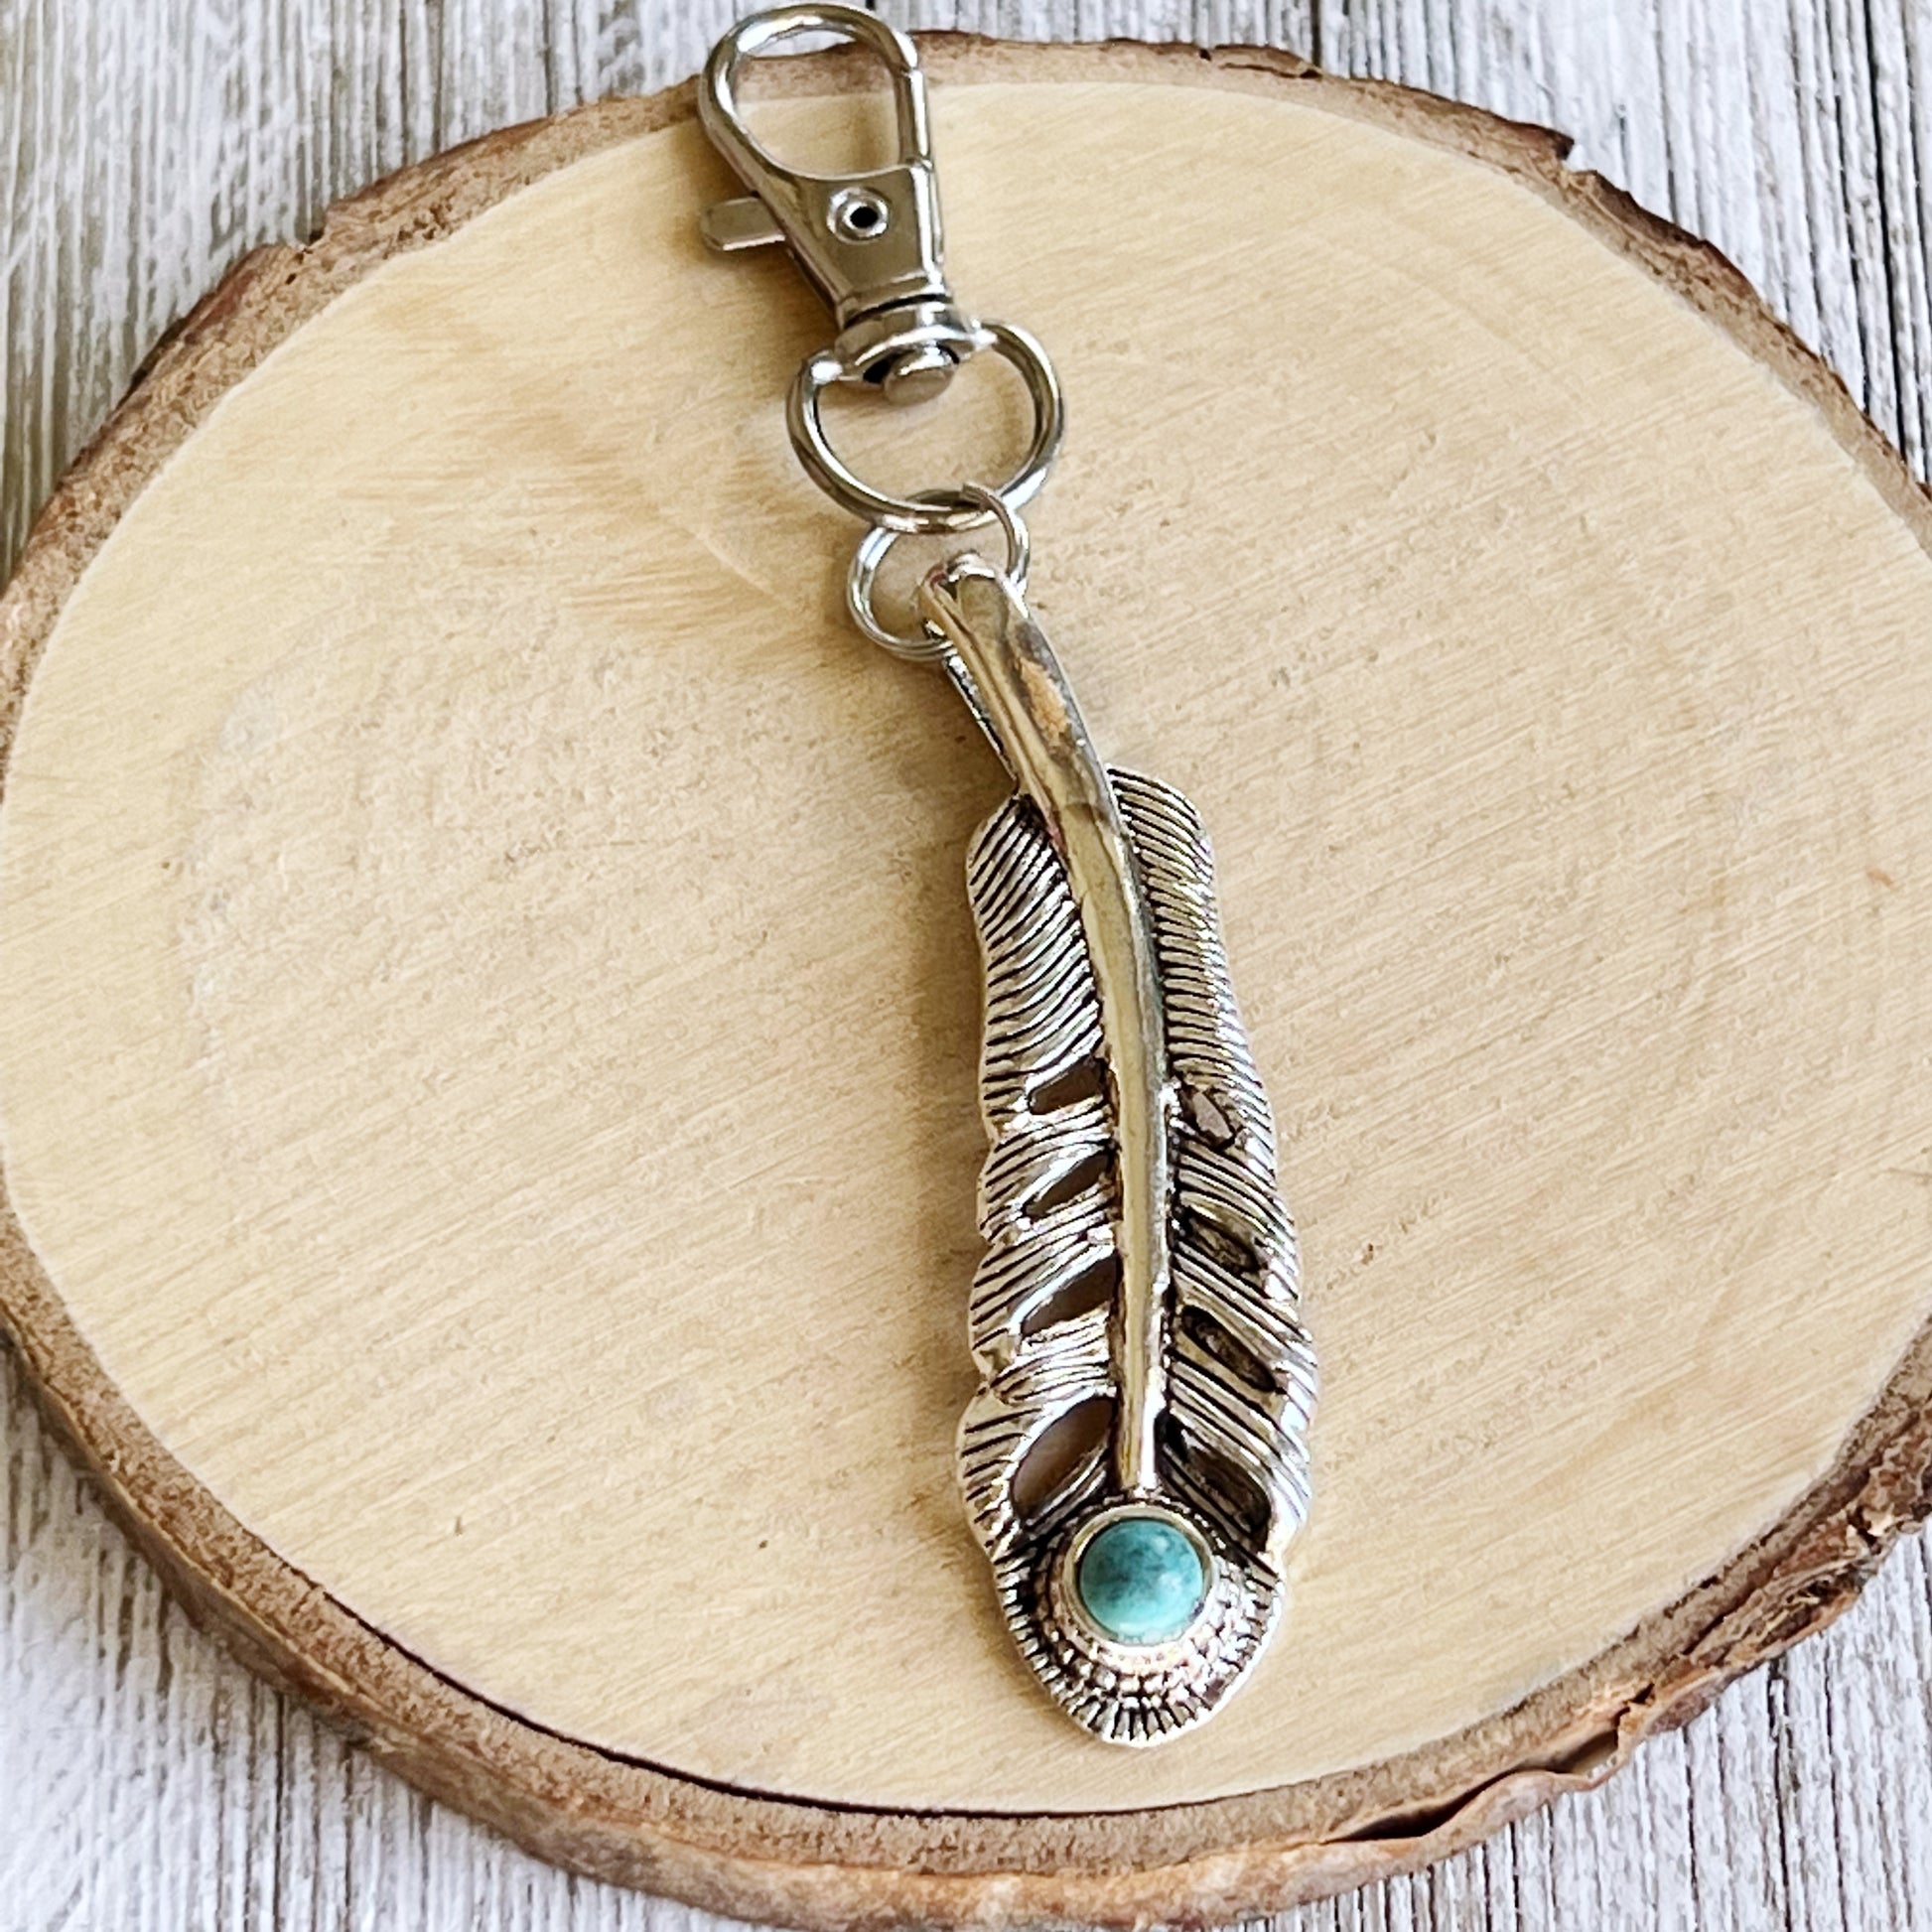 Silver Turquoise Feather Western Zipper Pull Boho Purse Charm - Stylish Southwest-Inspired Accessory